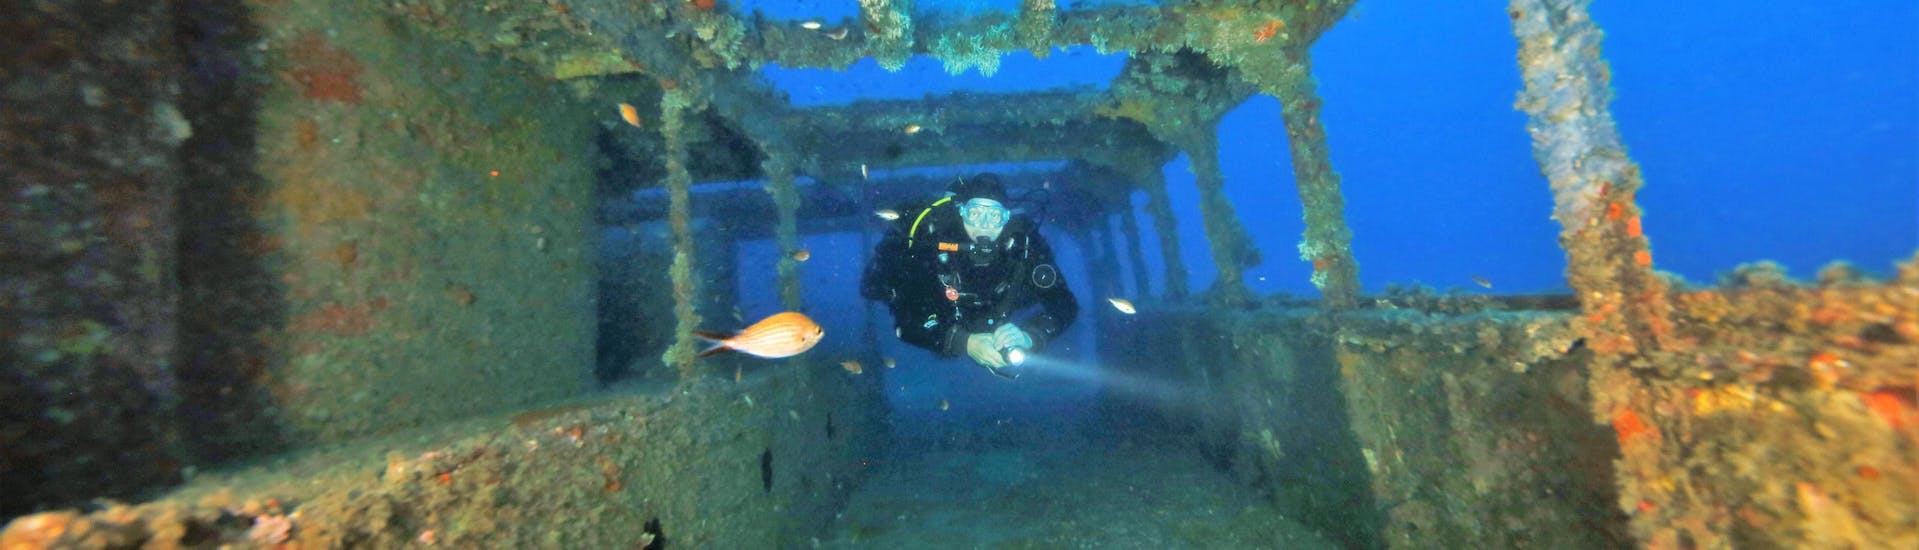 A diver is exploring a shipwreck in Malta during one of the Guided Boat & Shore Dives from Saint Paul's Bay with Octopus Garden.